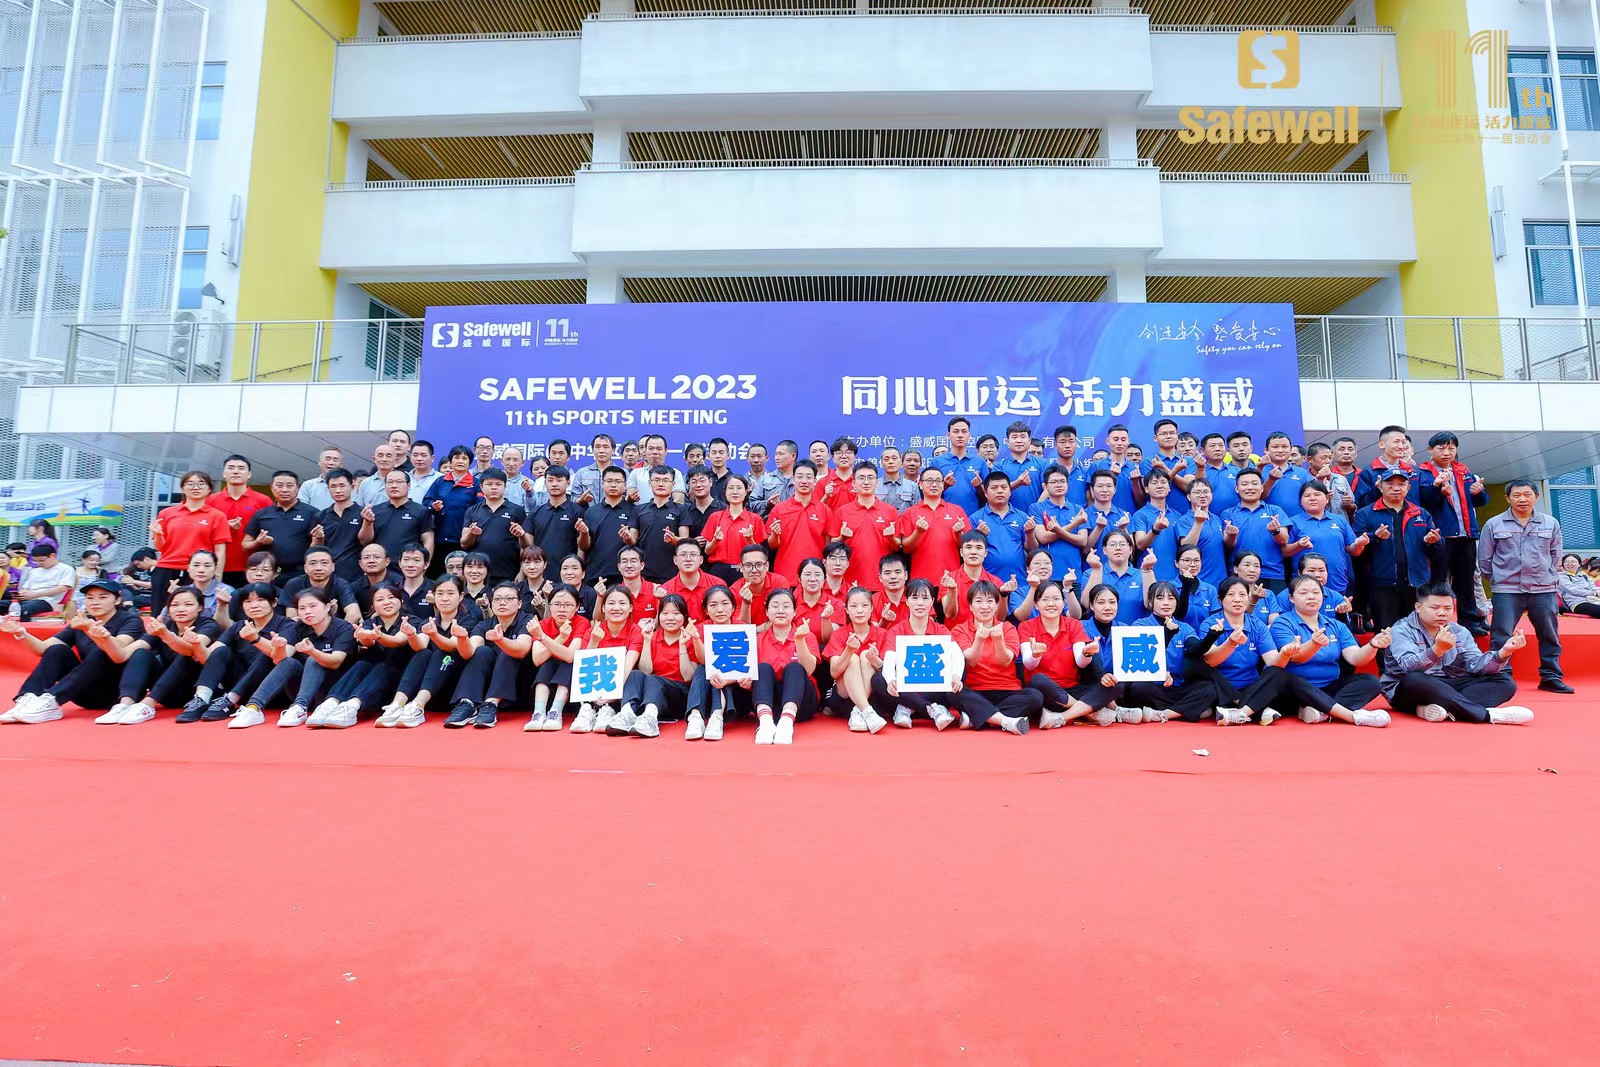 Safewell’s 11th Sports Day Uplifts Spirits with the “Harmony Asian Games ，A Showcase of Vigor” Theme